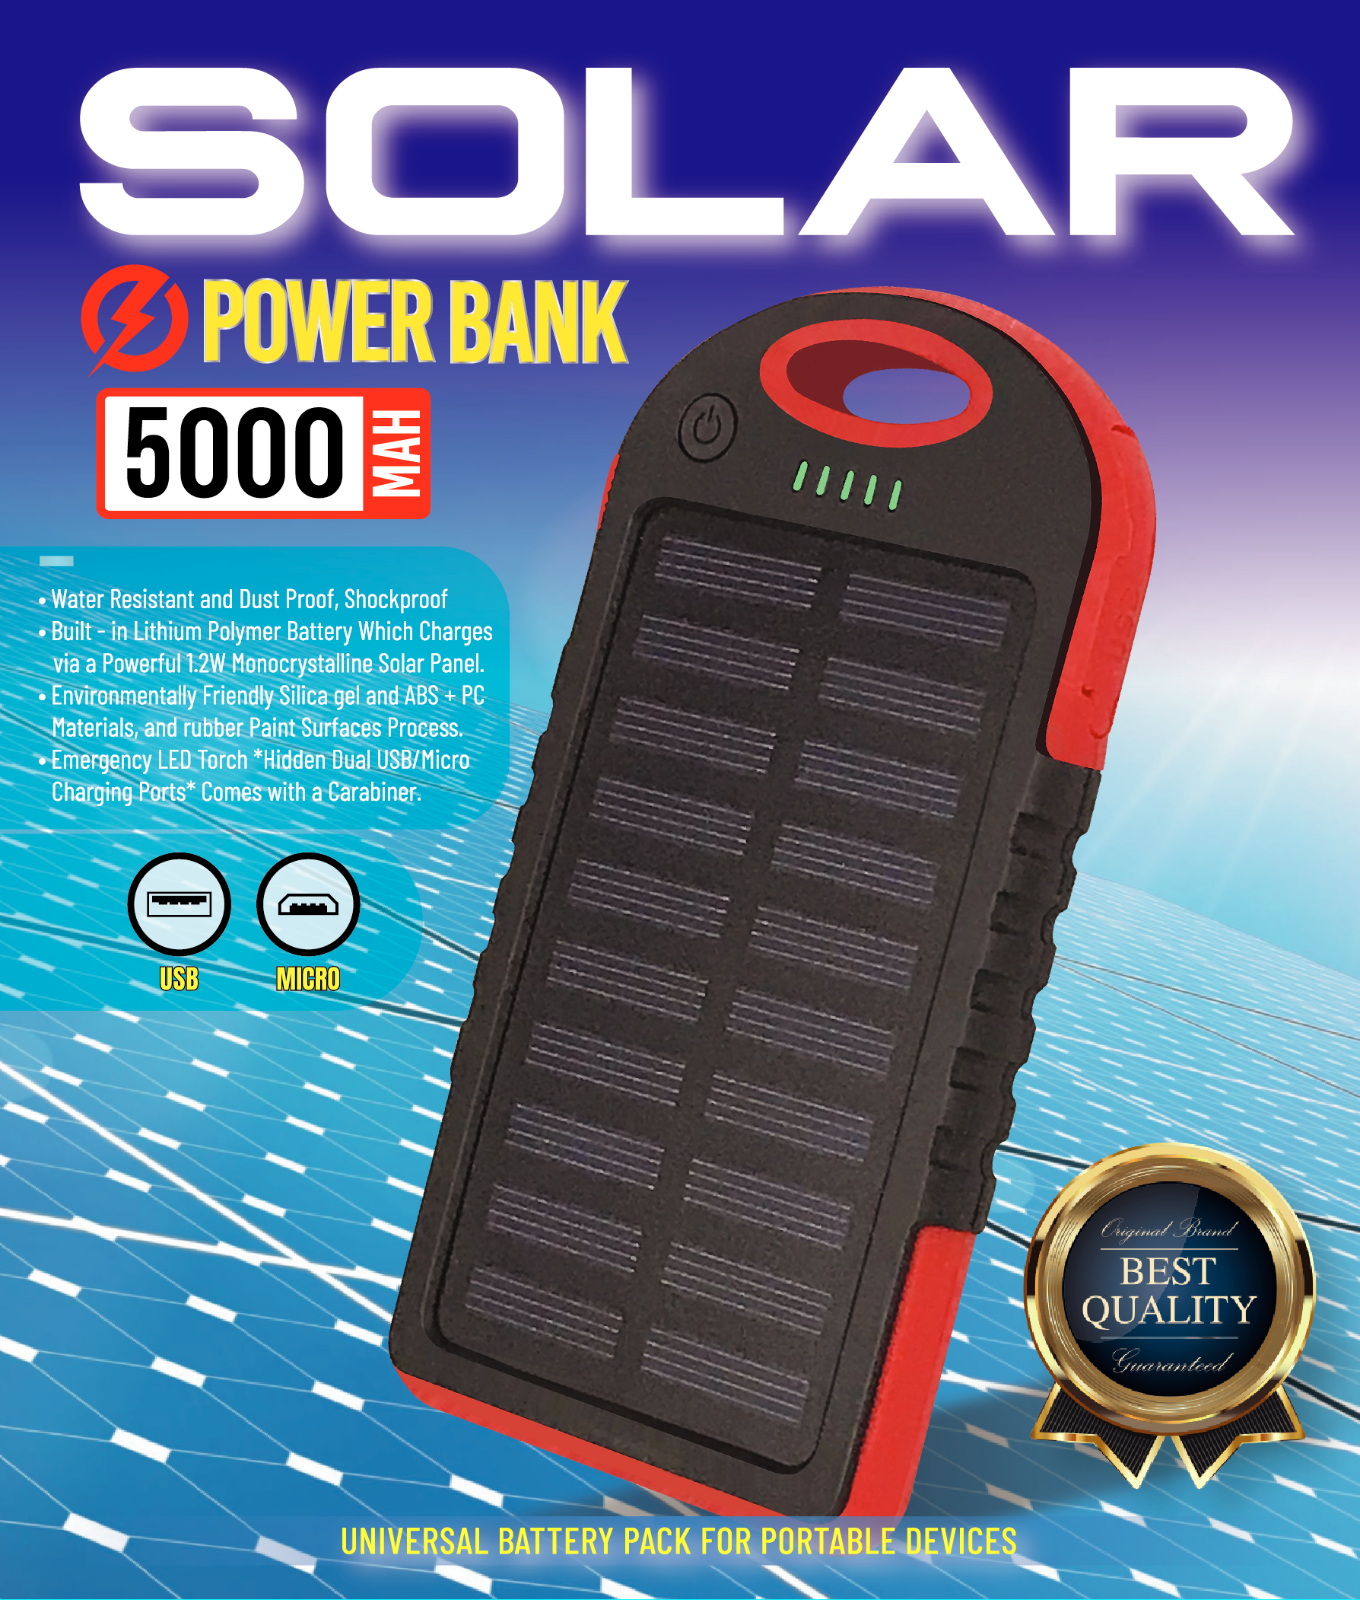 Super 5000mAh USB Portable Charger Solar Power Bank for iPho